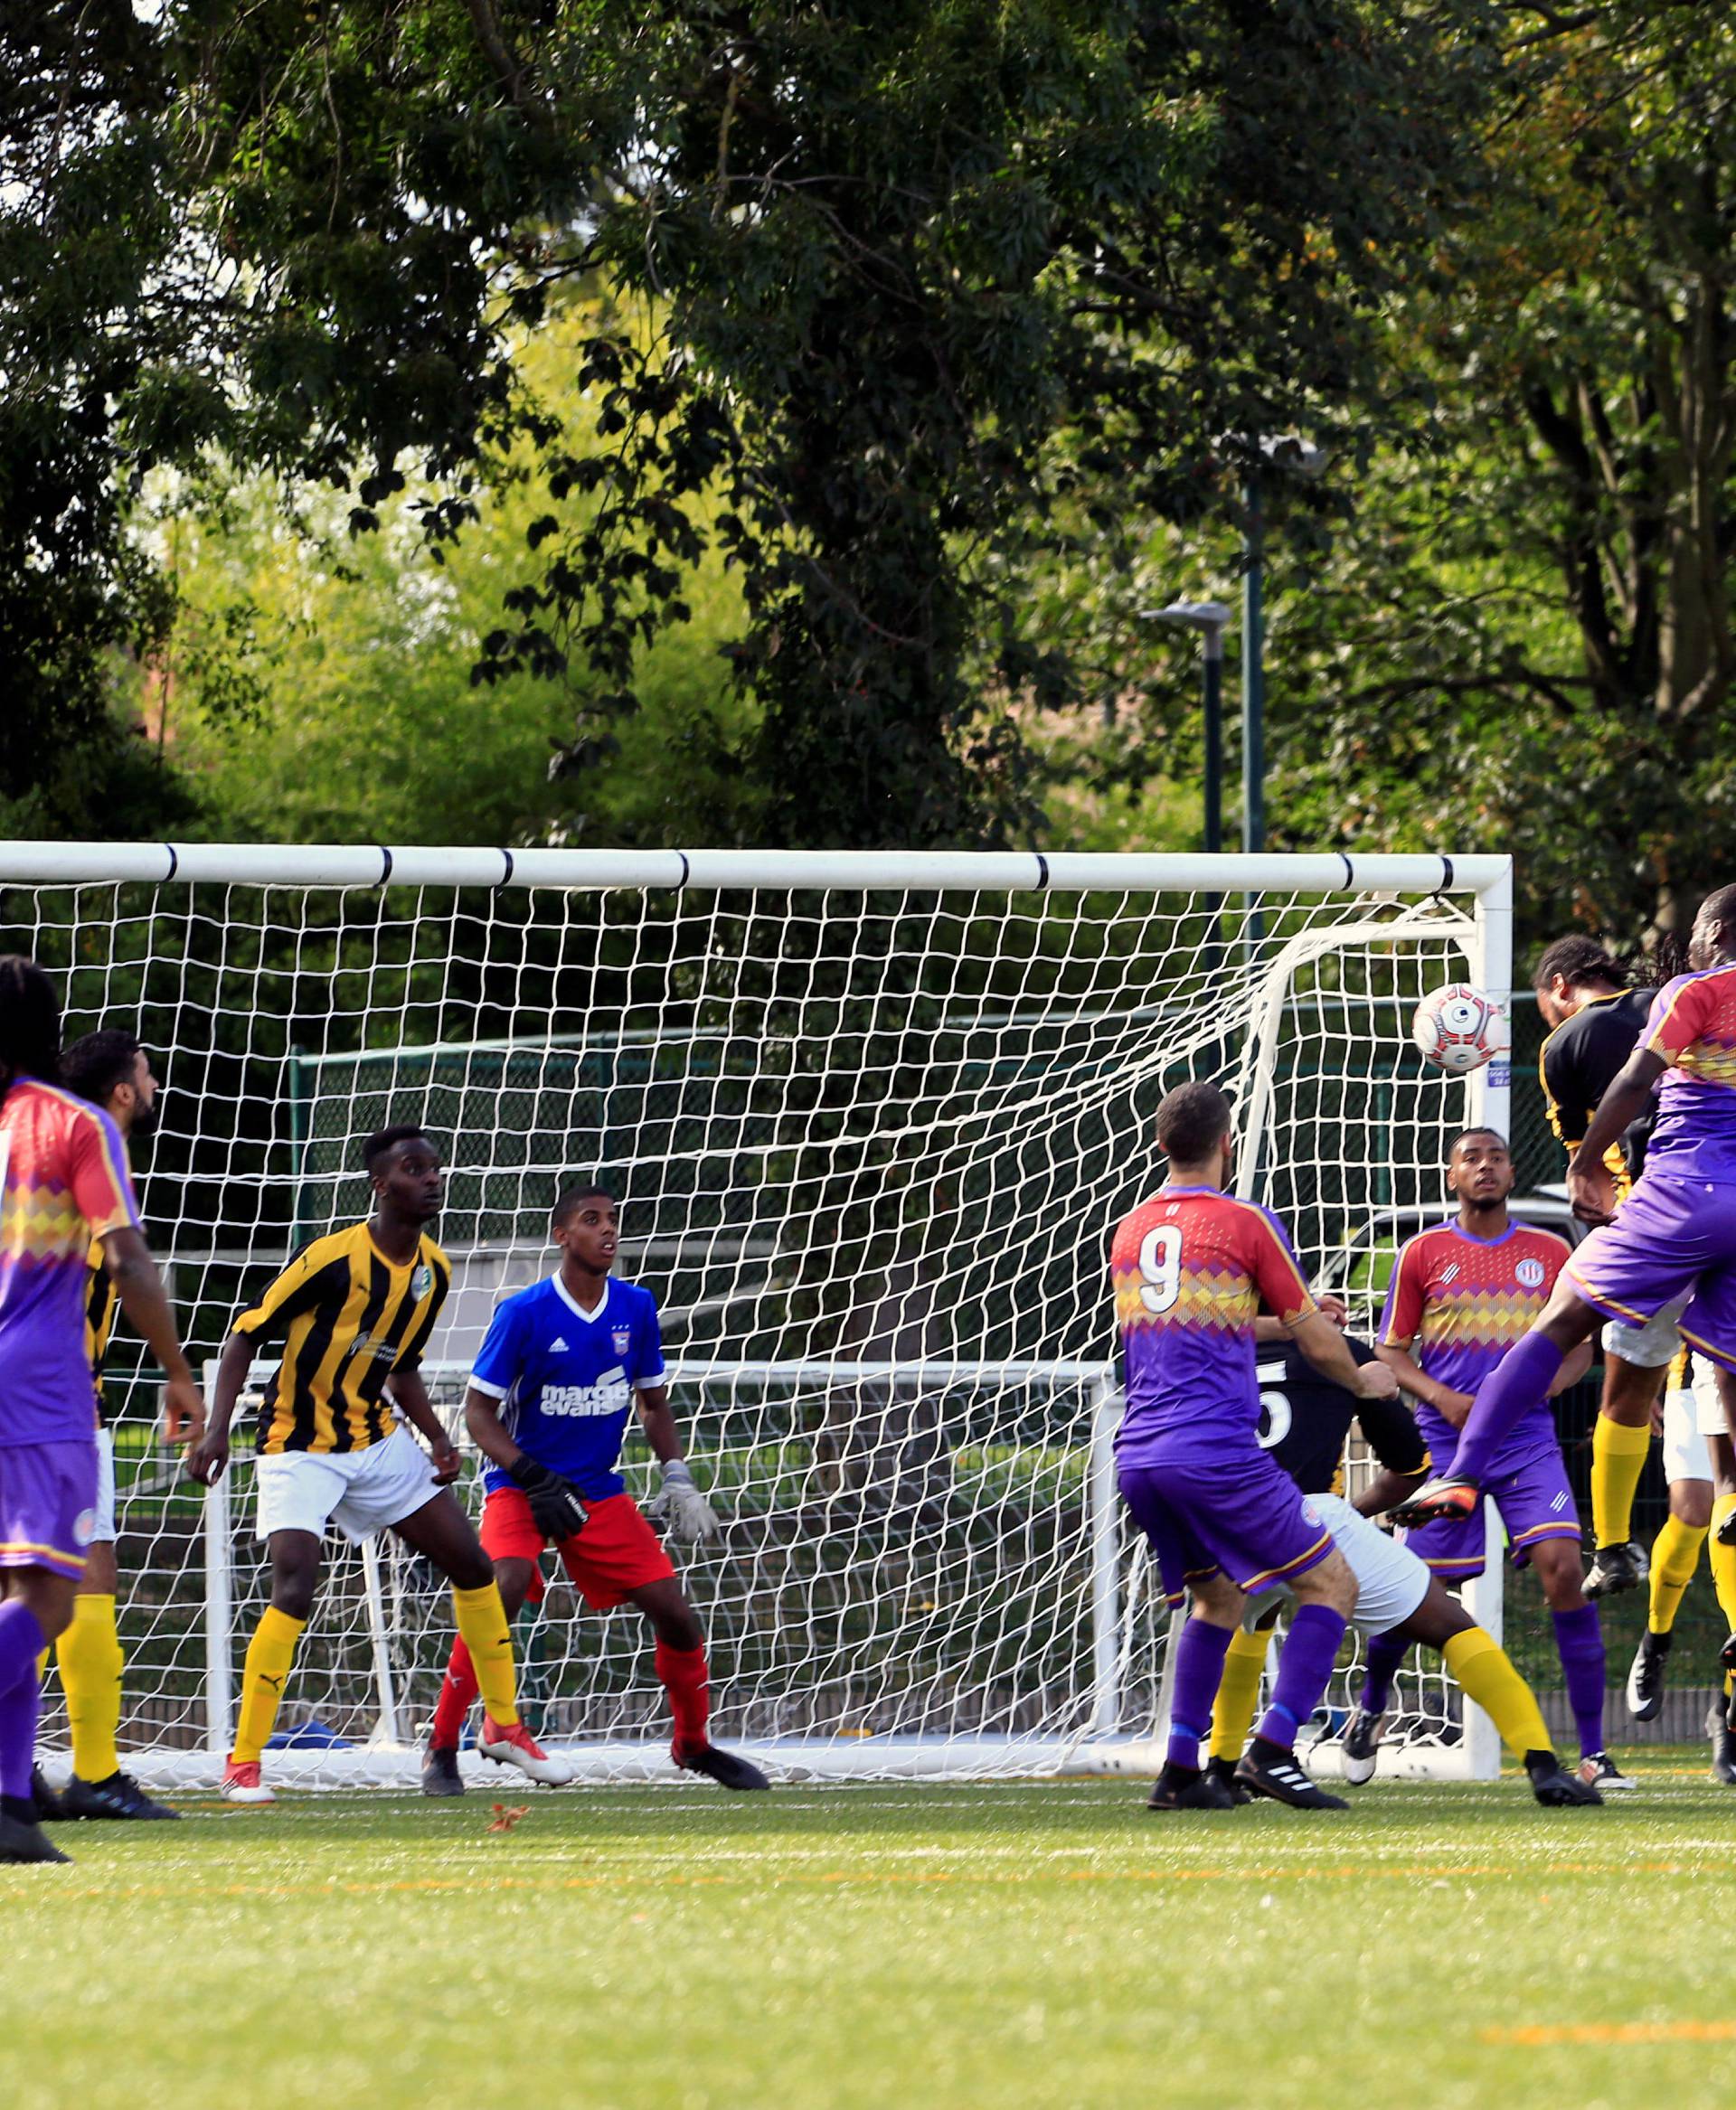 Clapton CFC players (blue jersey) attack the defence of Ealing Town during away game in East Acton, in London